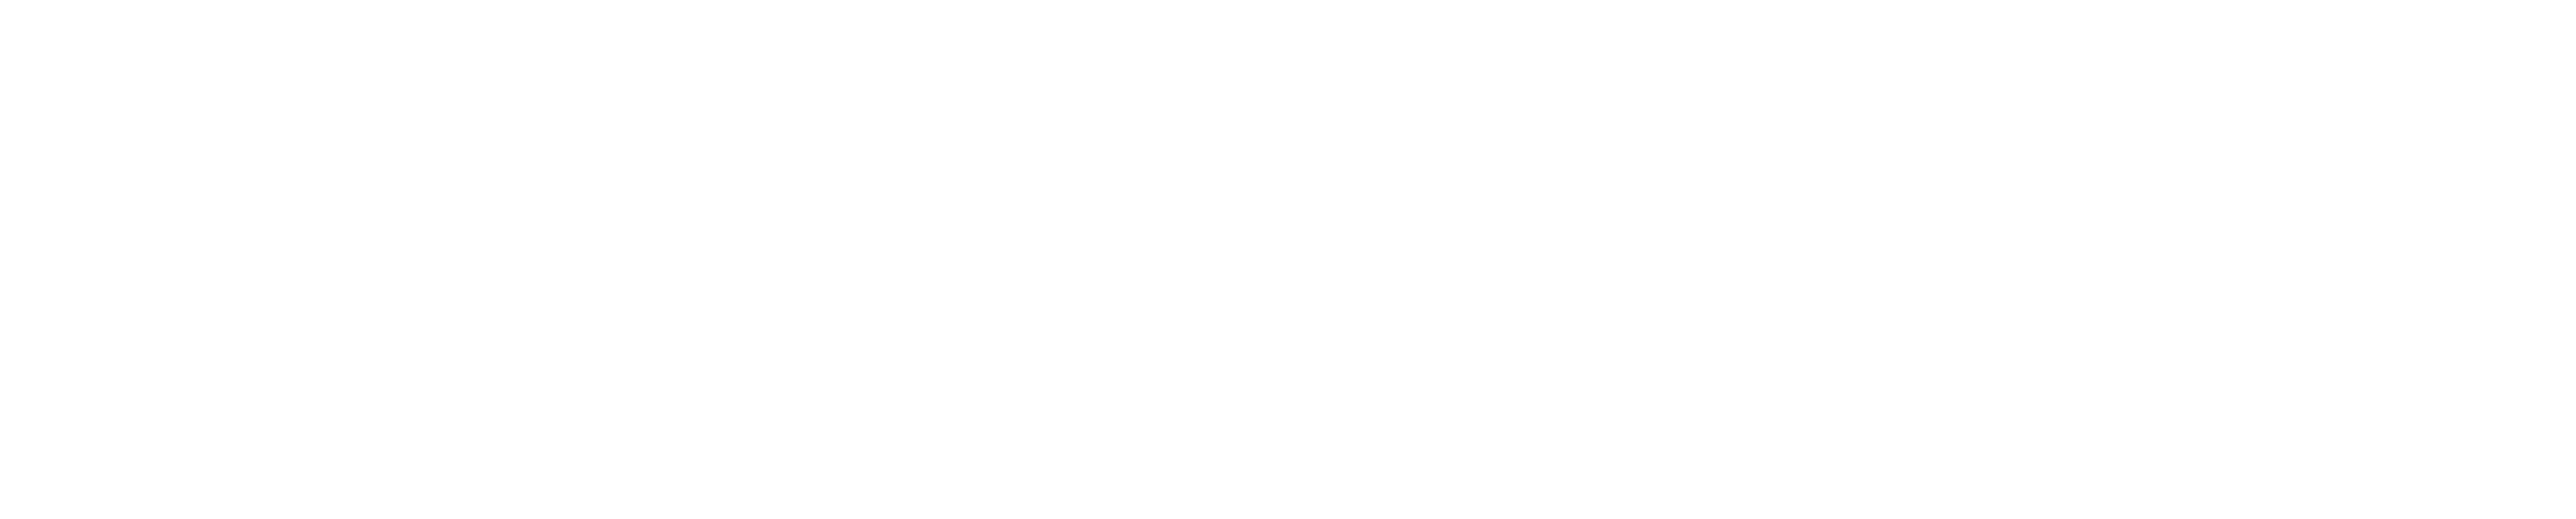 The Cassity Team | REAL